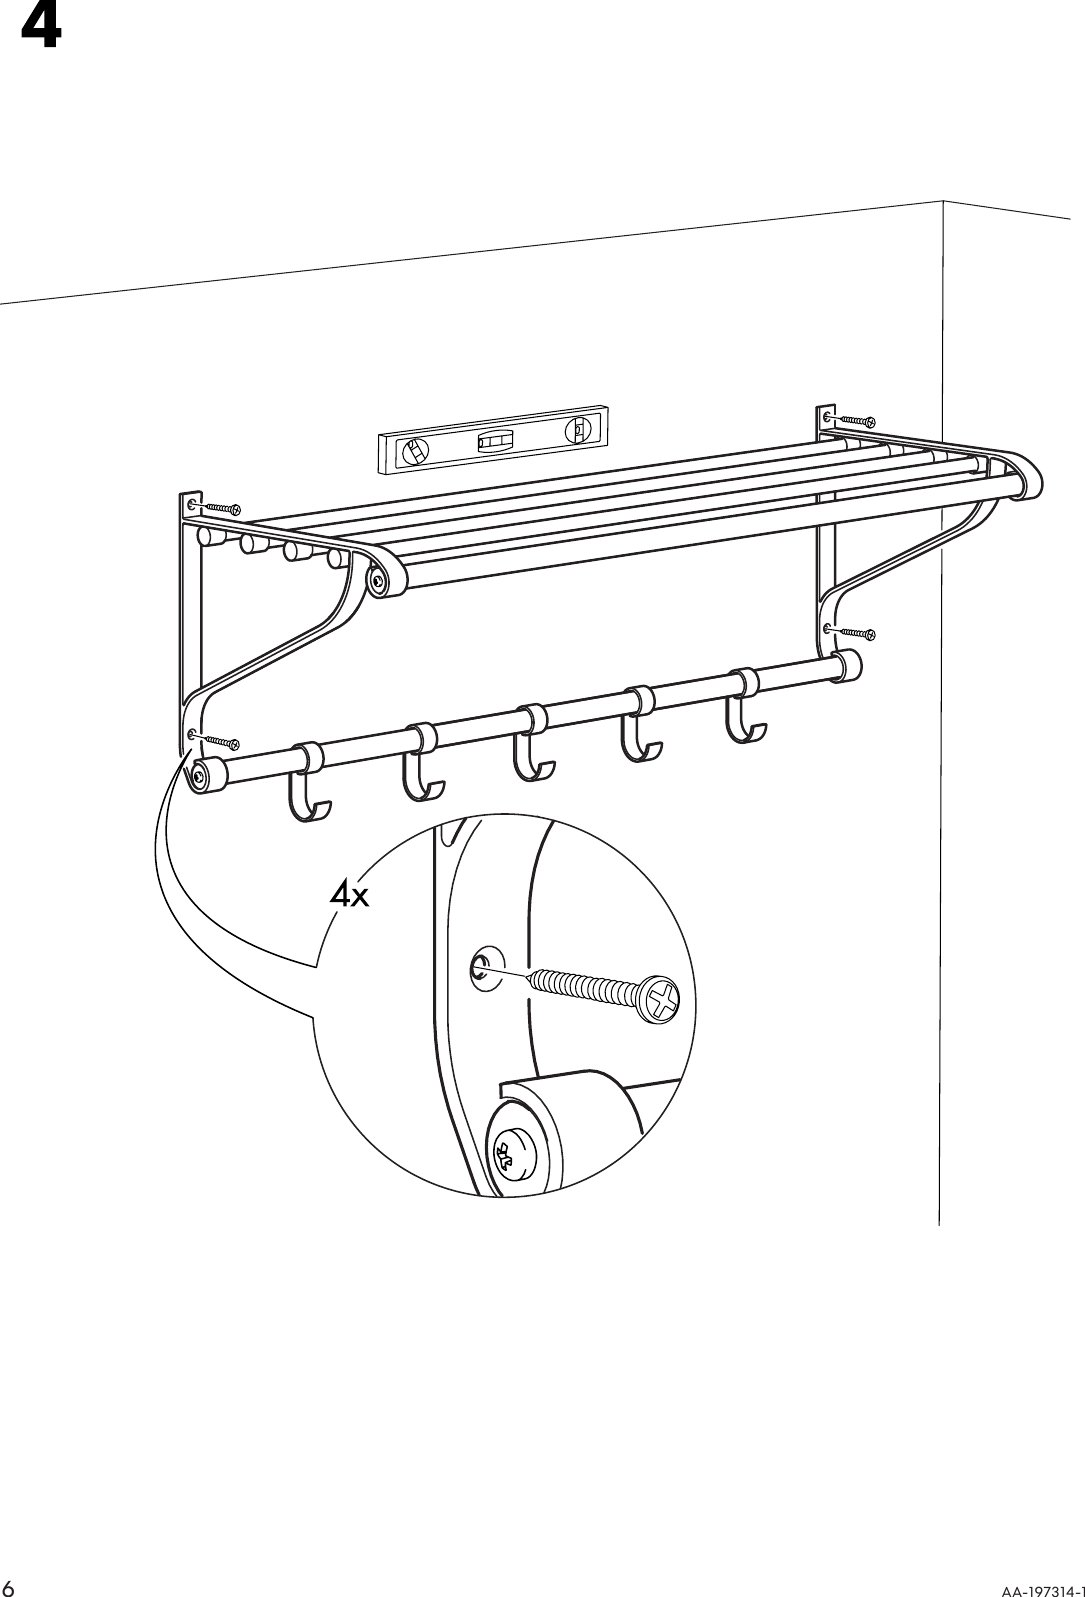 Page 6 of 8 - Ikea Ikea-Portis-Hat-Rack-35-3-8-Assembly-Instruction